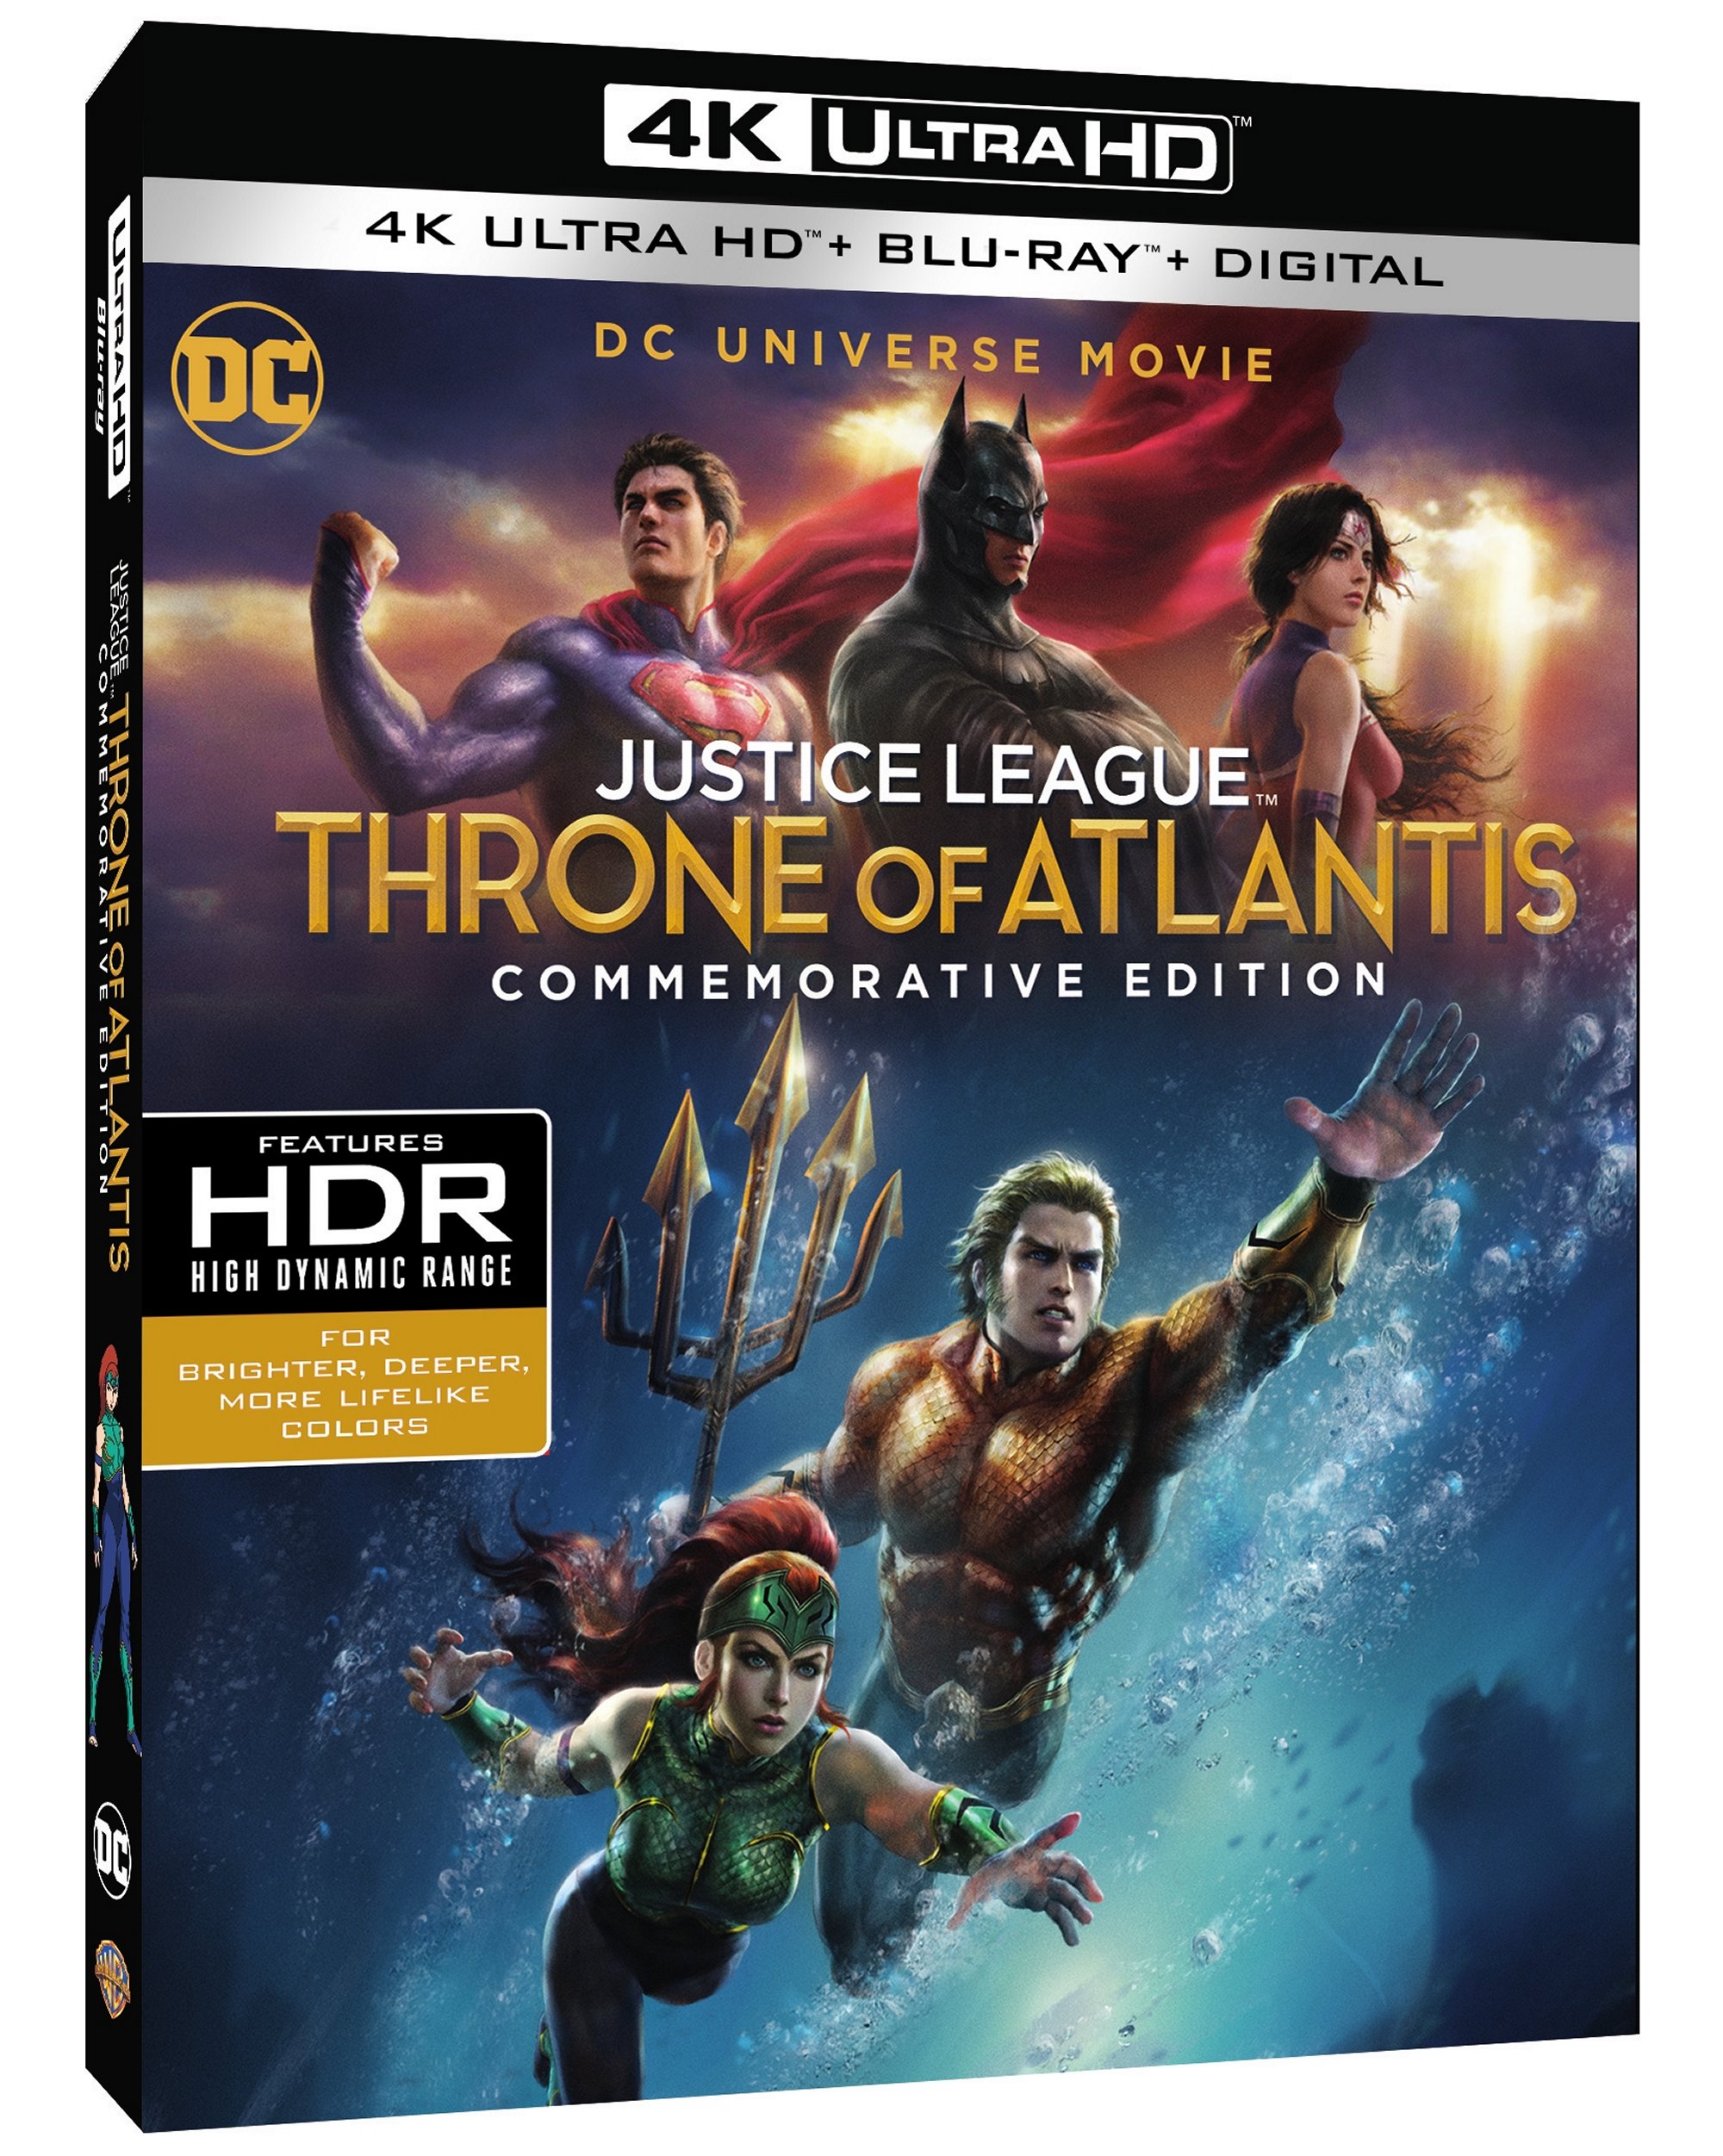 Justice League Throne of Atlantis 4K Blu-ray release